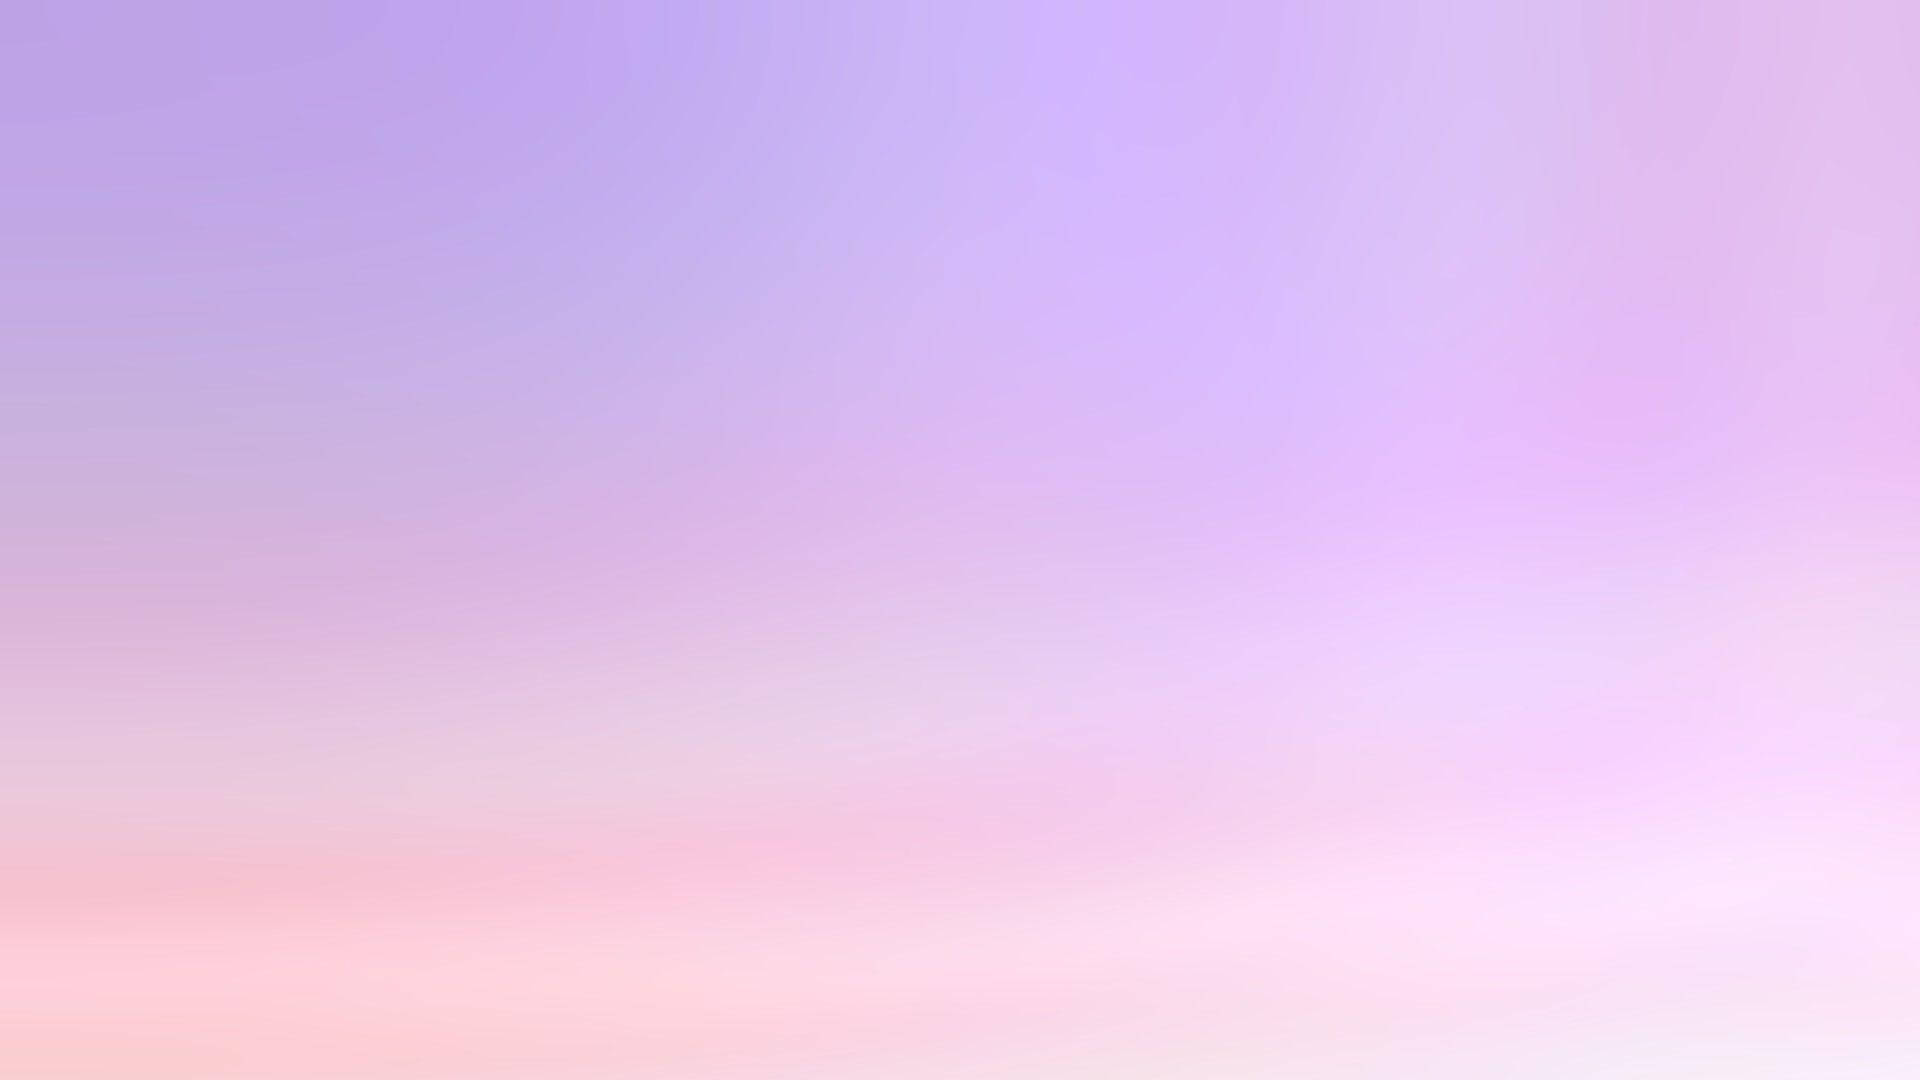 Pink And Purple Gradient Pastel Aesthetic Tumblr Laptop Background